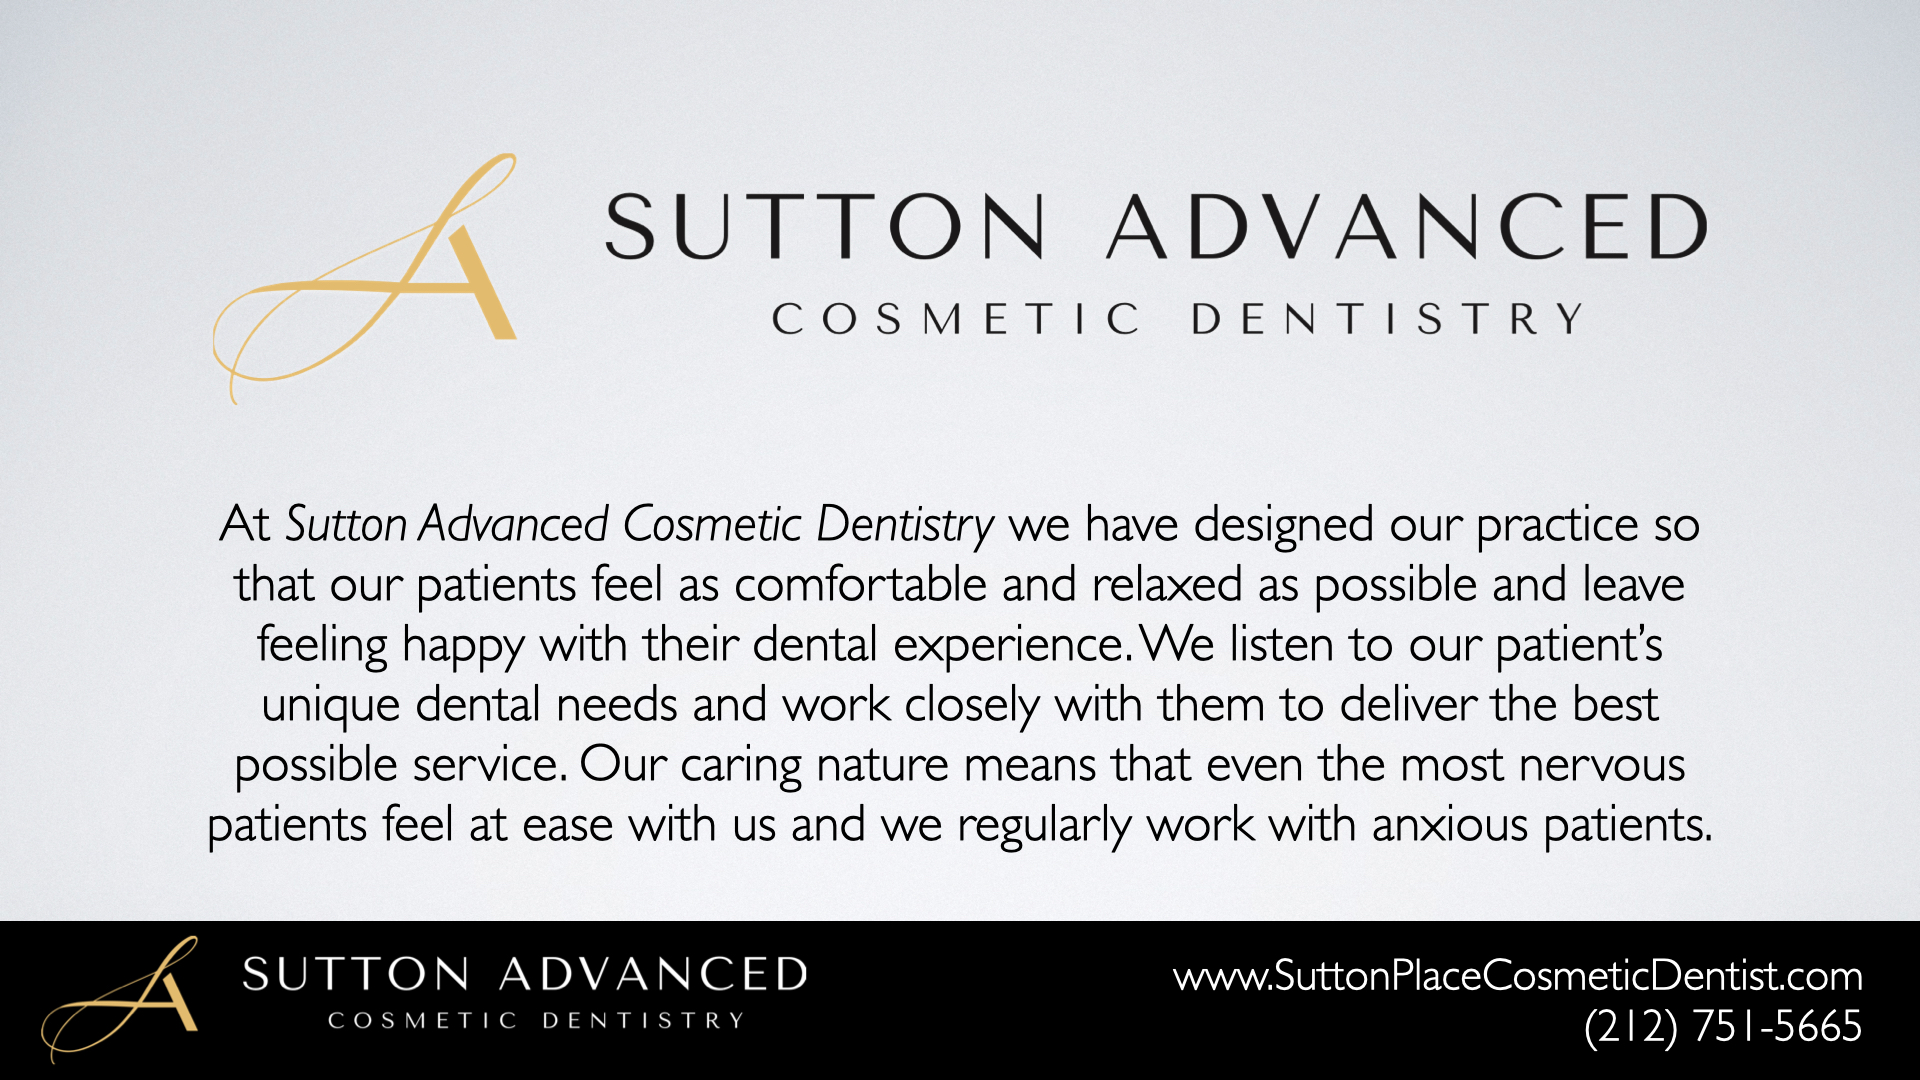 About Sutton Advanced Cosmetic Dentistry